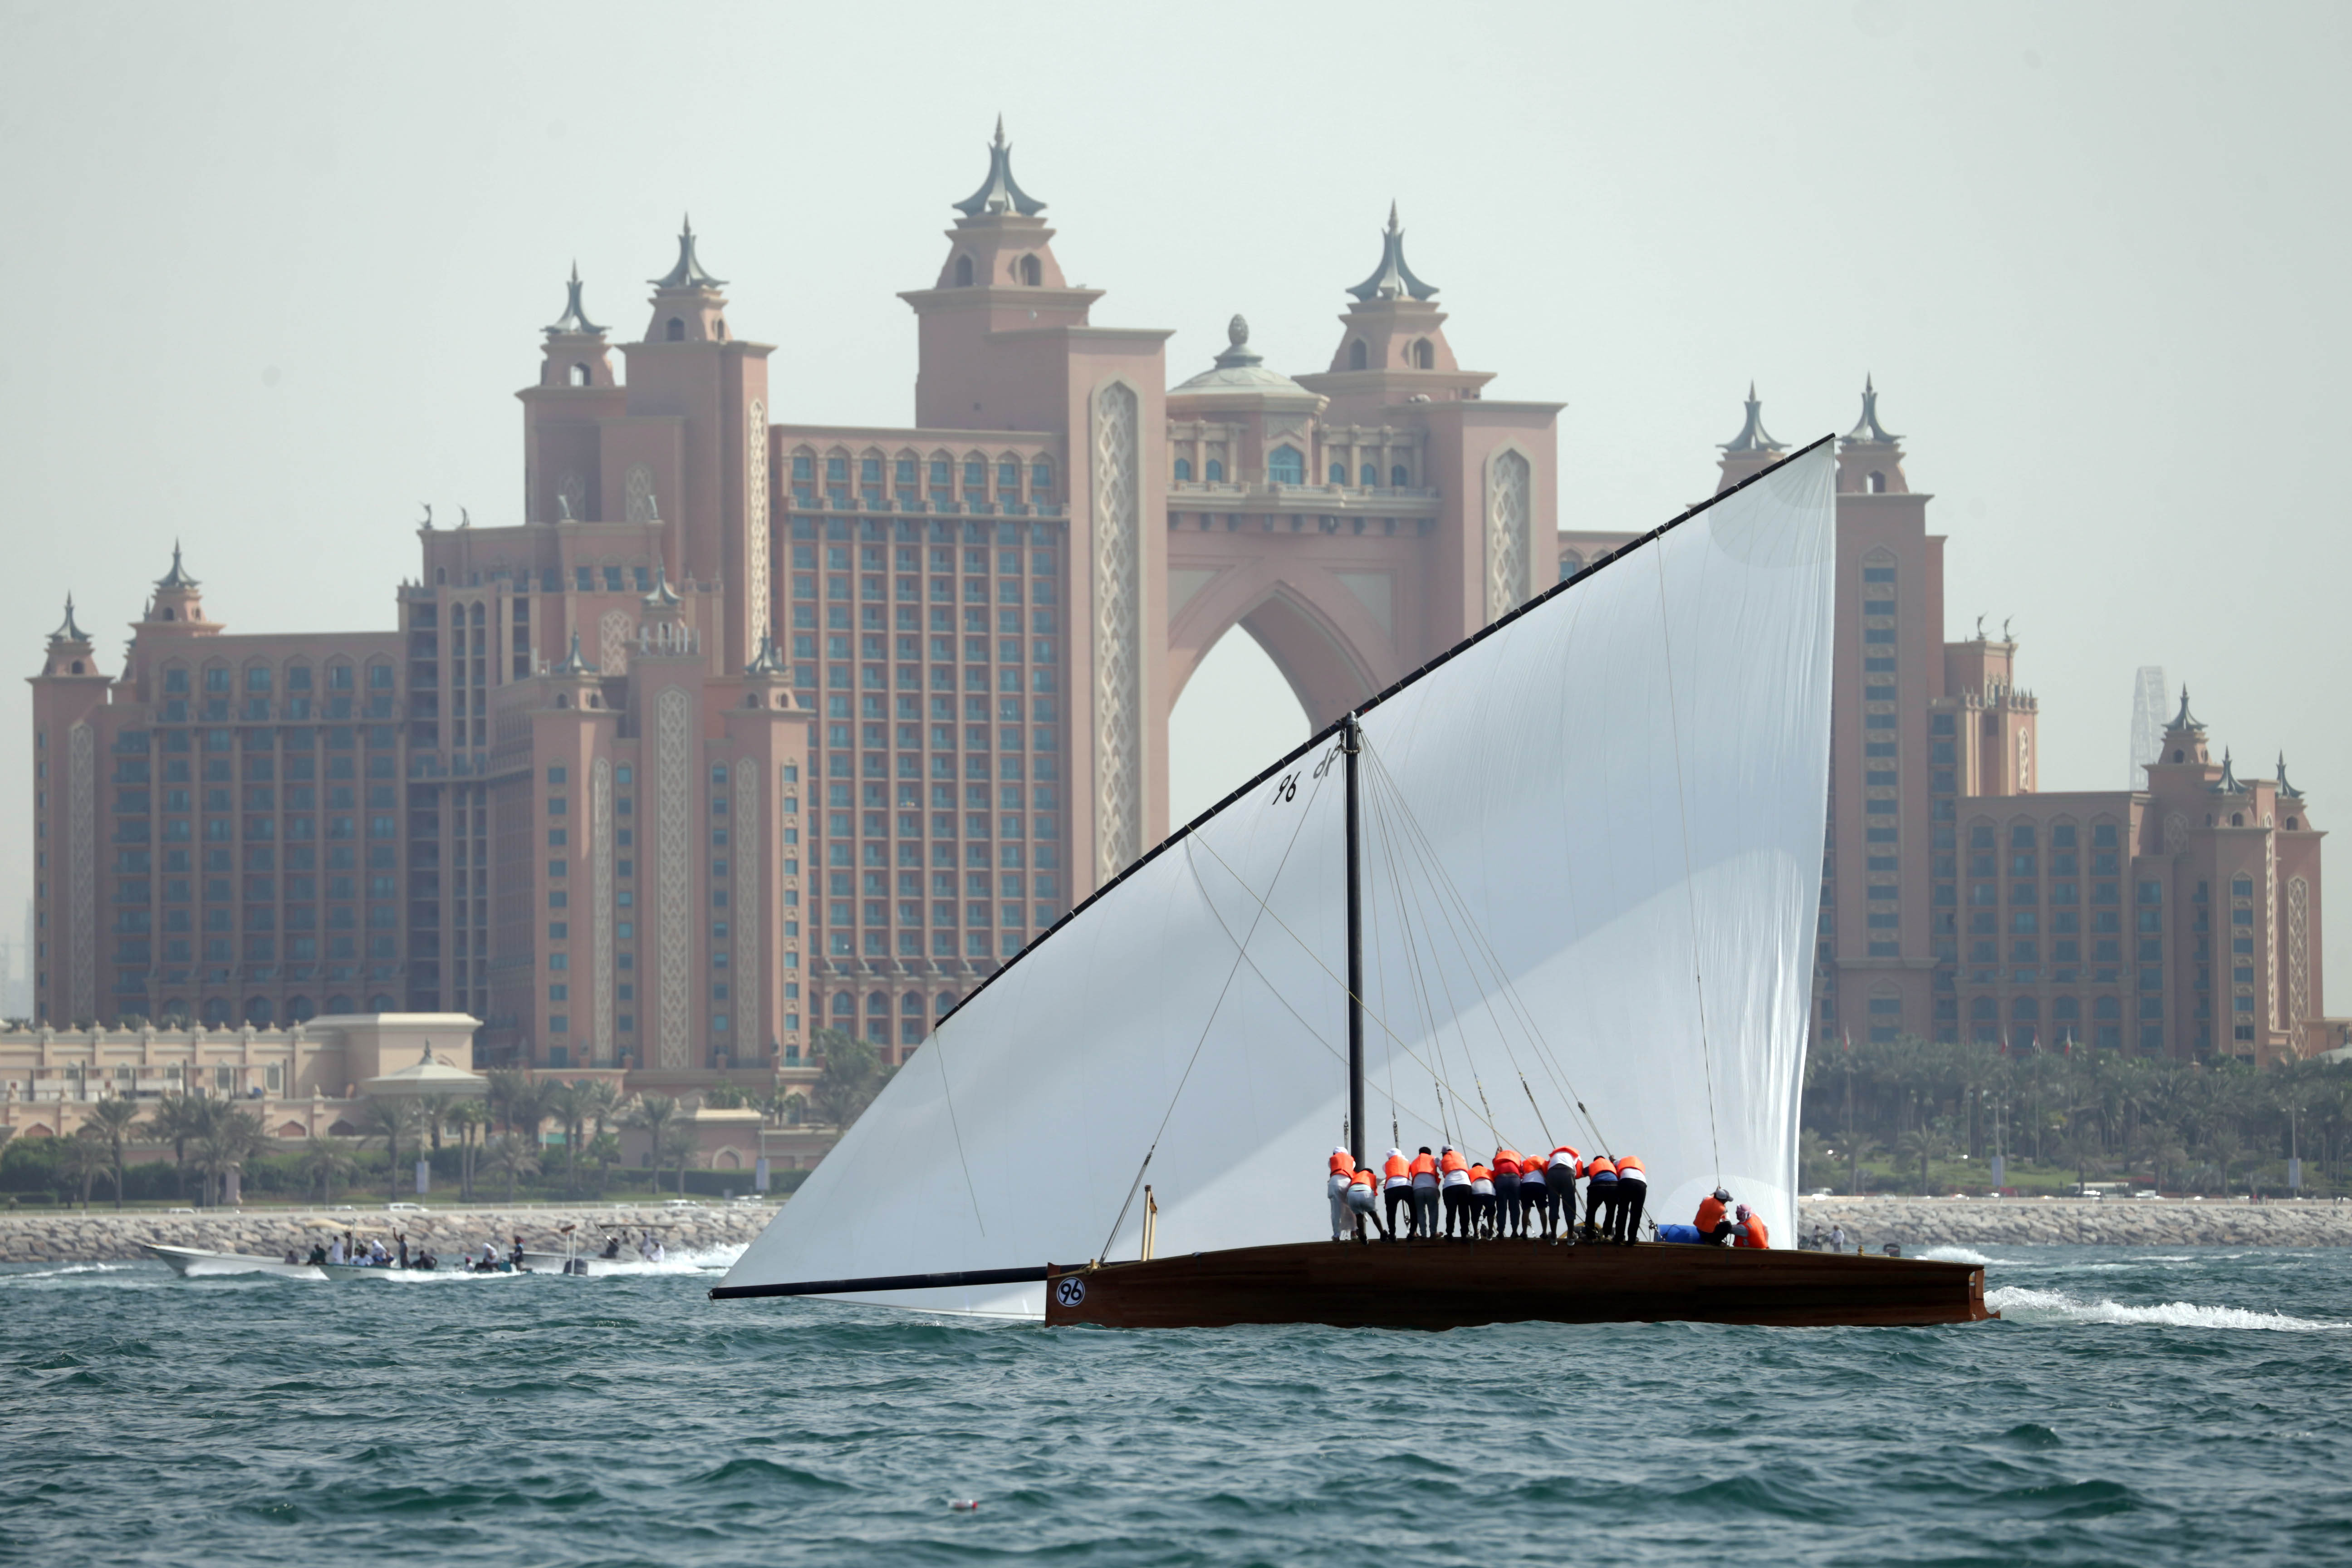 Registration Closes Today for the First Round of 43ft Dubai Traditional Dhow Sailing Race